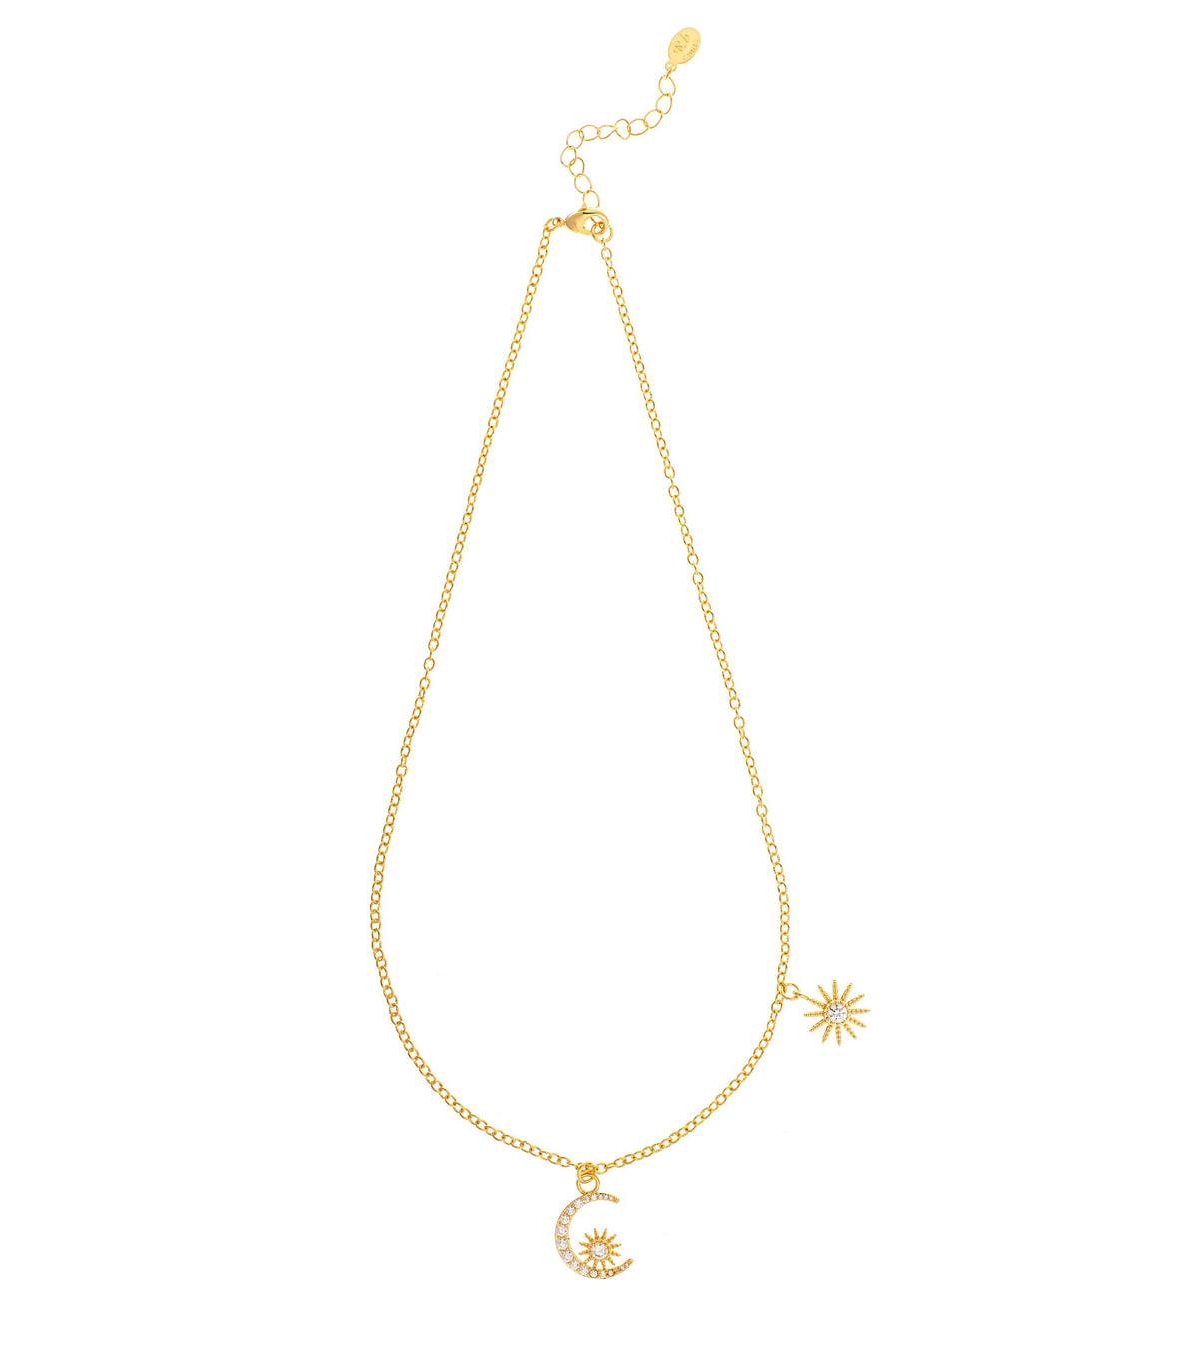 Cz Encrusted Moon & Star Necklace - Gold with clear cubic zirconia